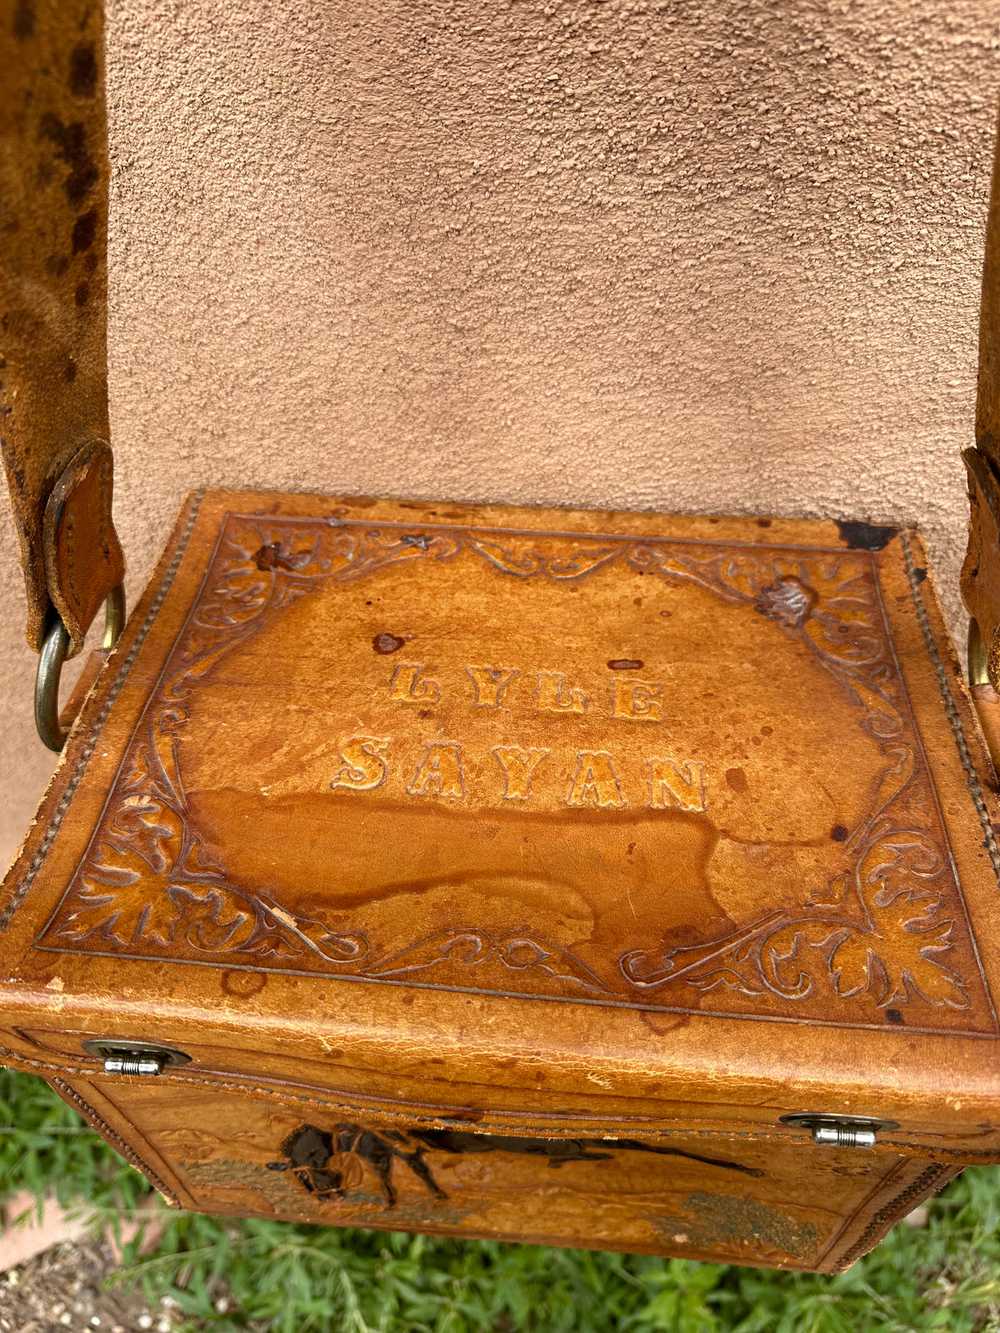 Hand Tooled Leather Cowboy Tack Box/Carry Case - image 6